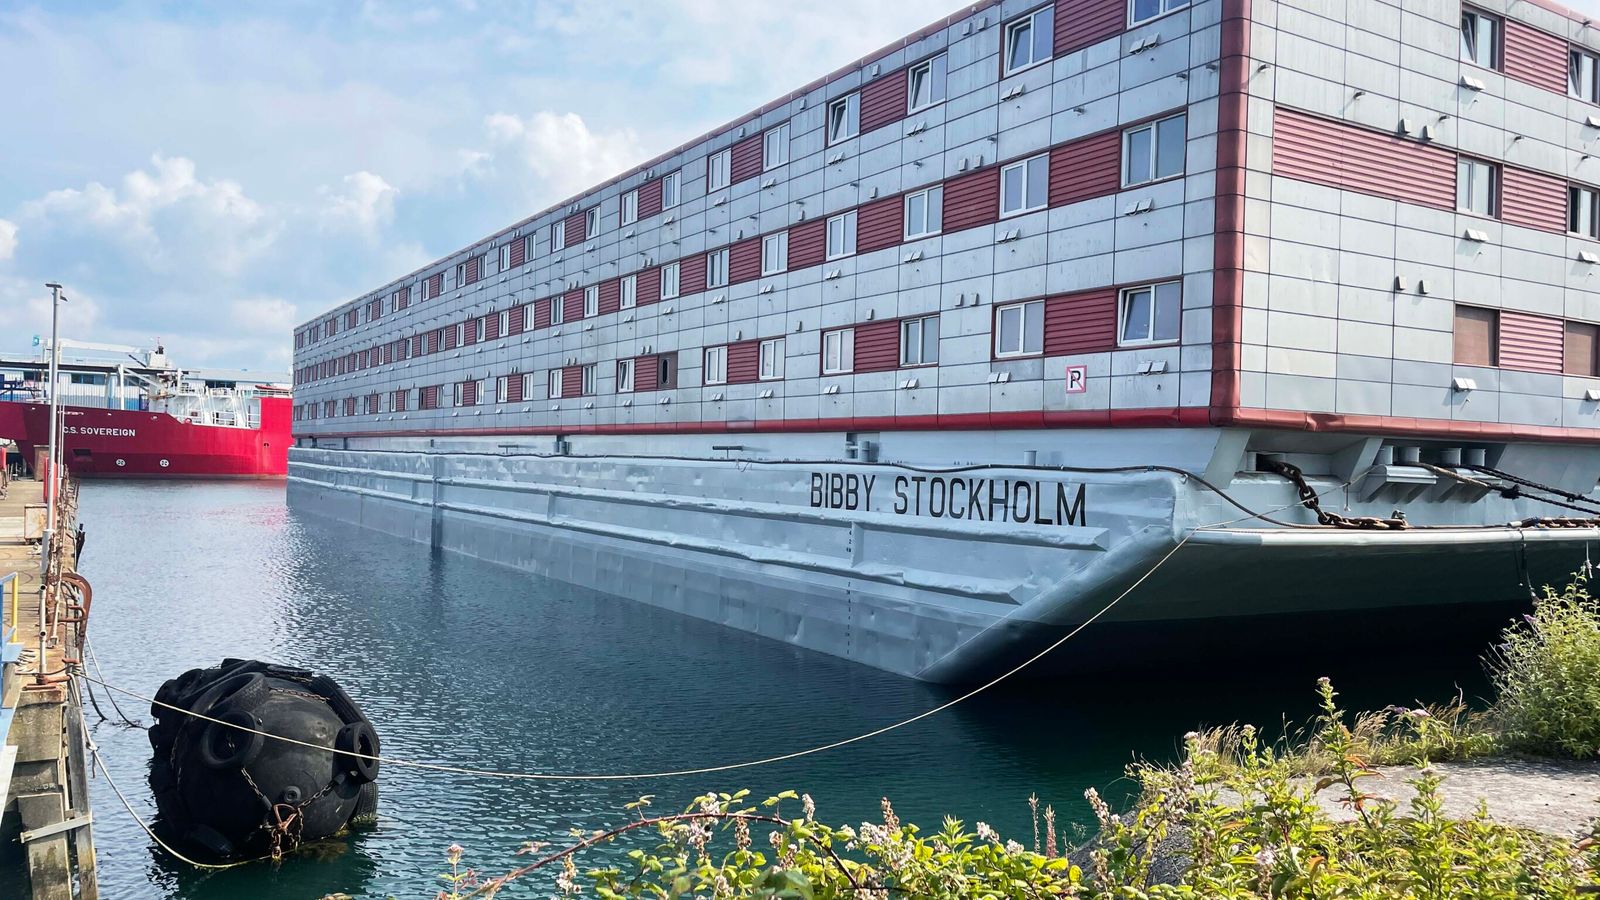 Bibby Stockholm: Asylum seekers may be housed on barge from today - as govt unveils new migration policy